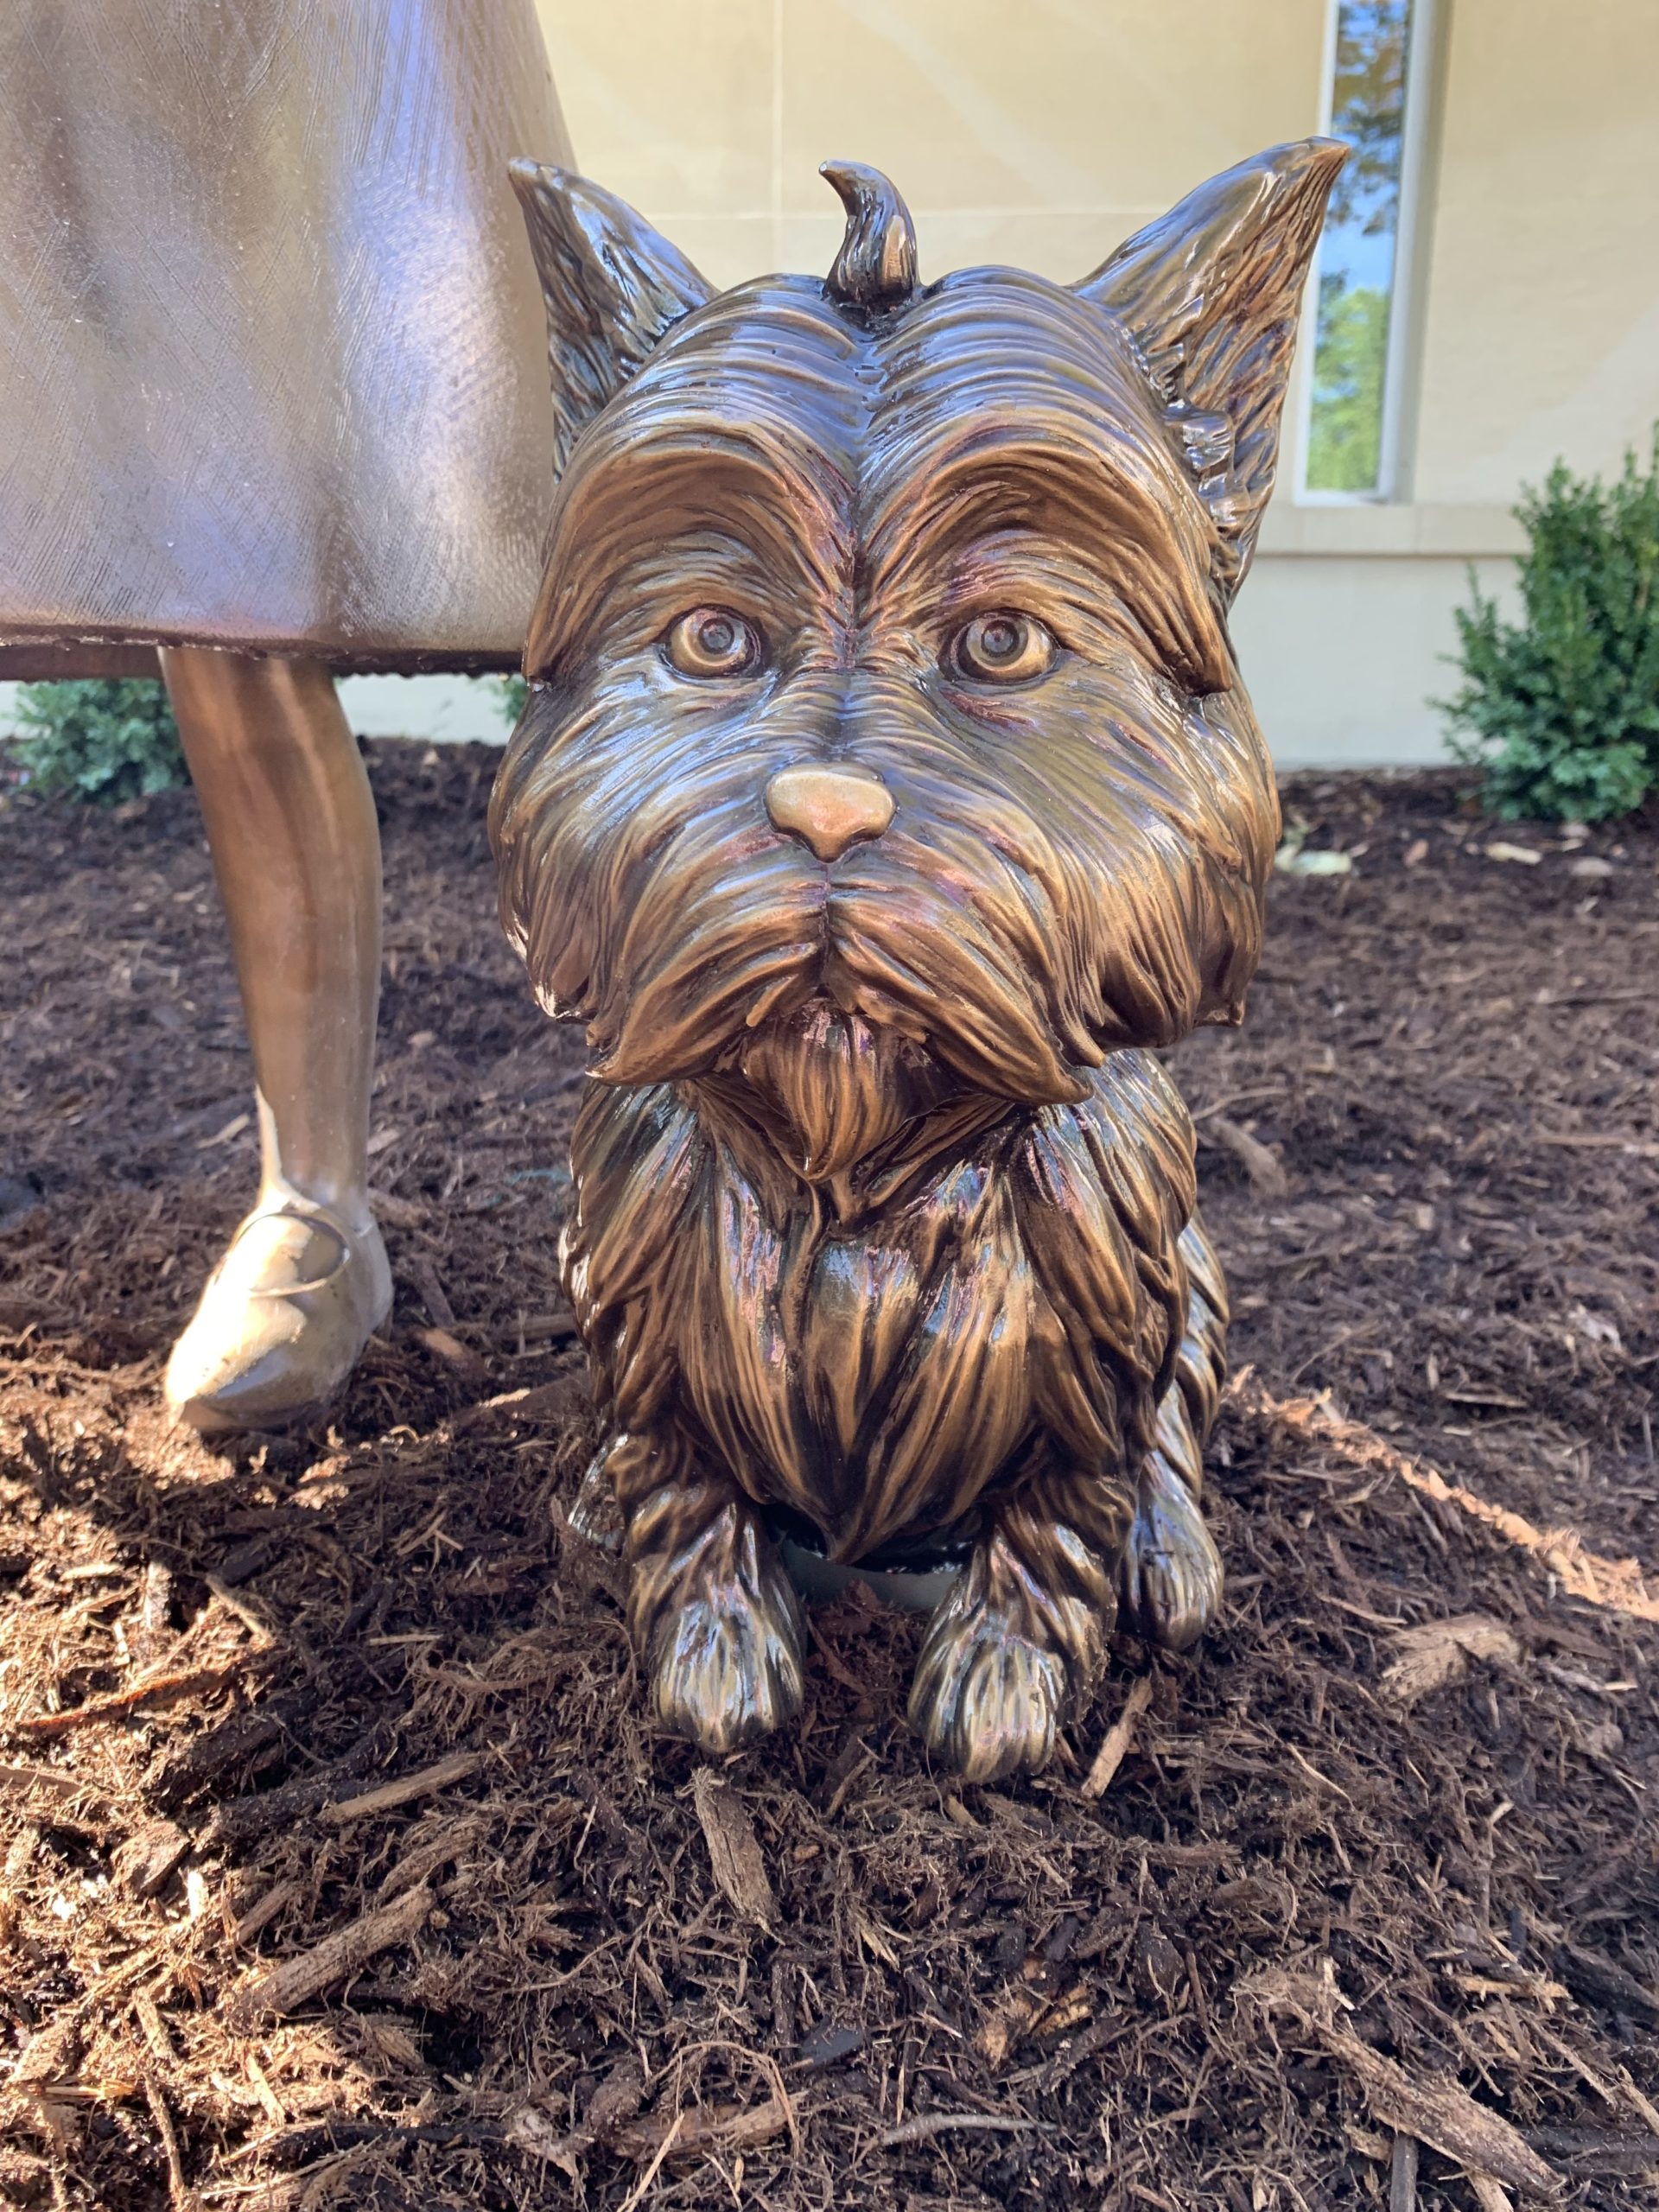 toto wizard of oz statues